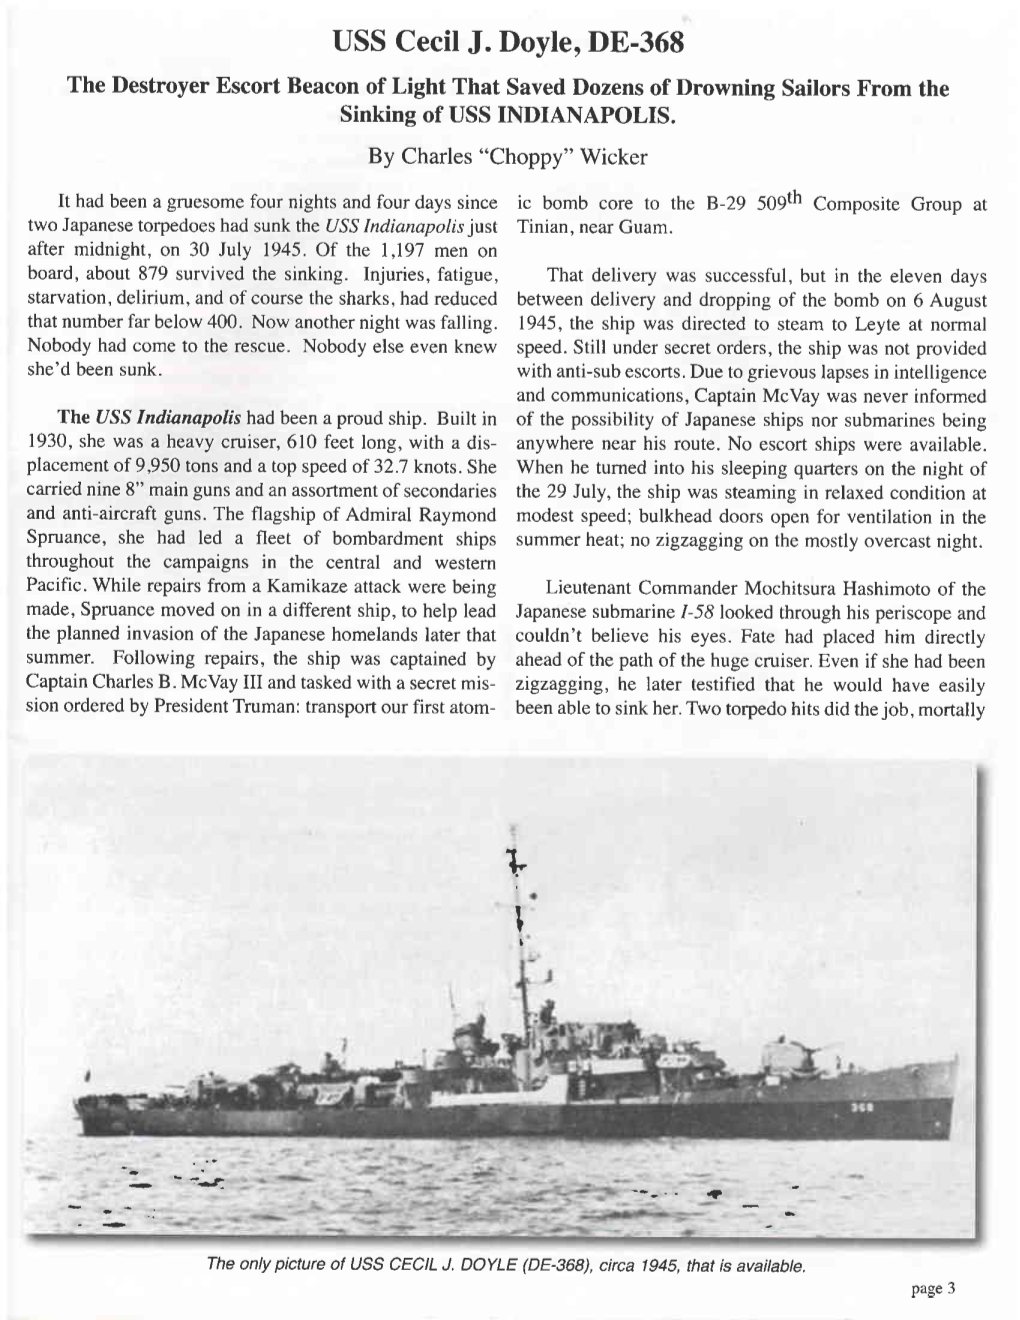 USS Cecil J. Doyle, DE-368 the Destroyer Escort Beacon of Light That Saved Dozens of Drowning Sailors from the Sinking of USS INDIANAPOLIS